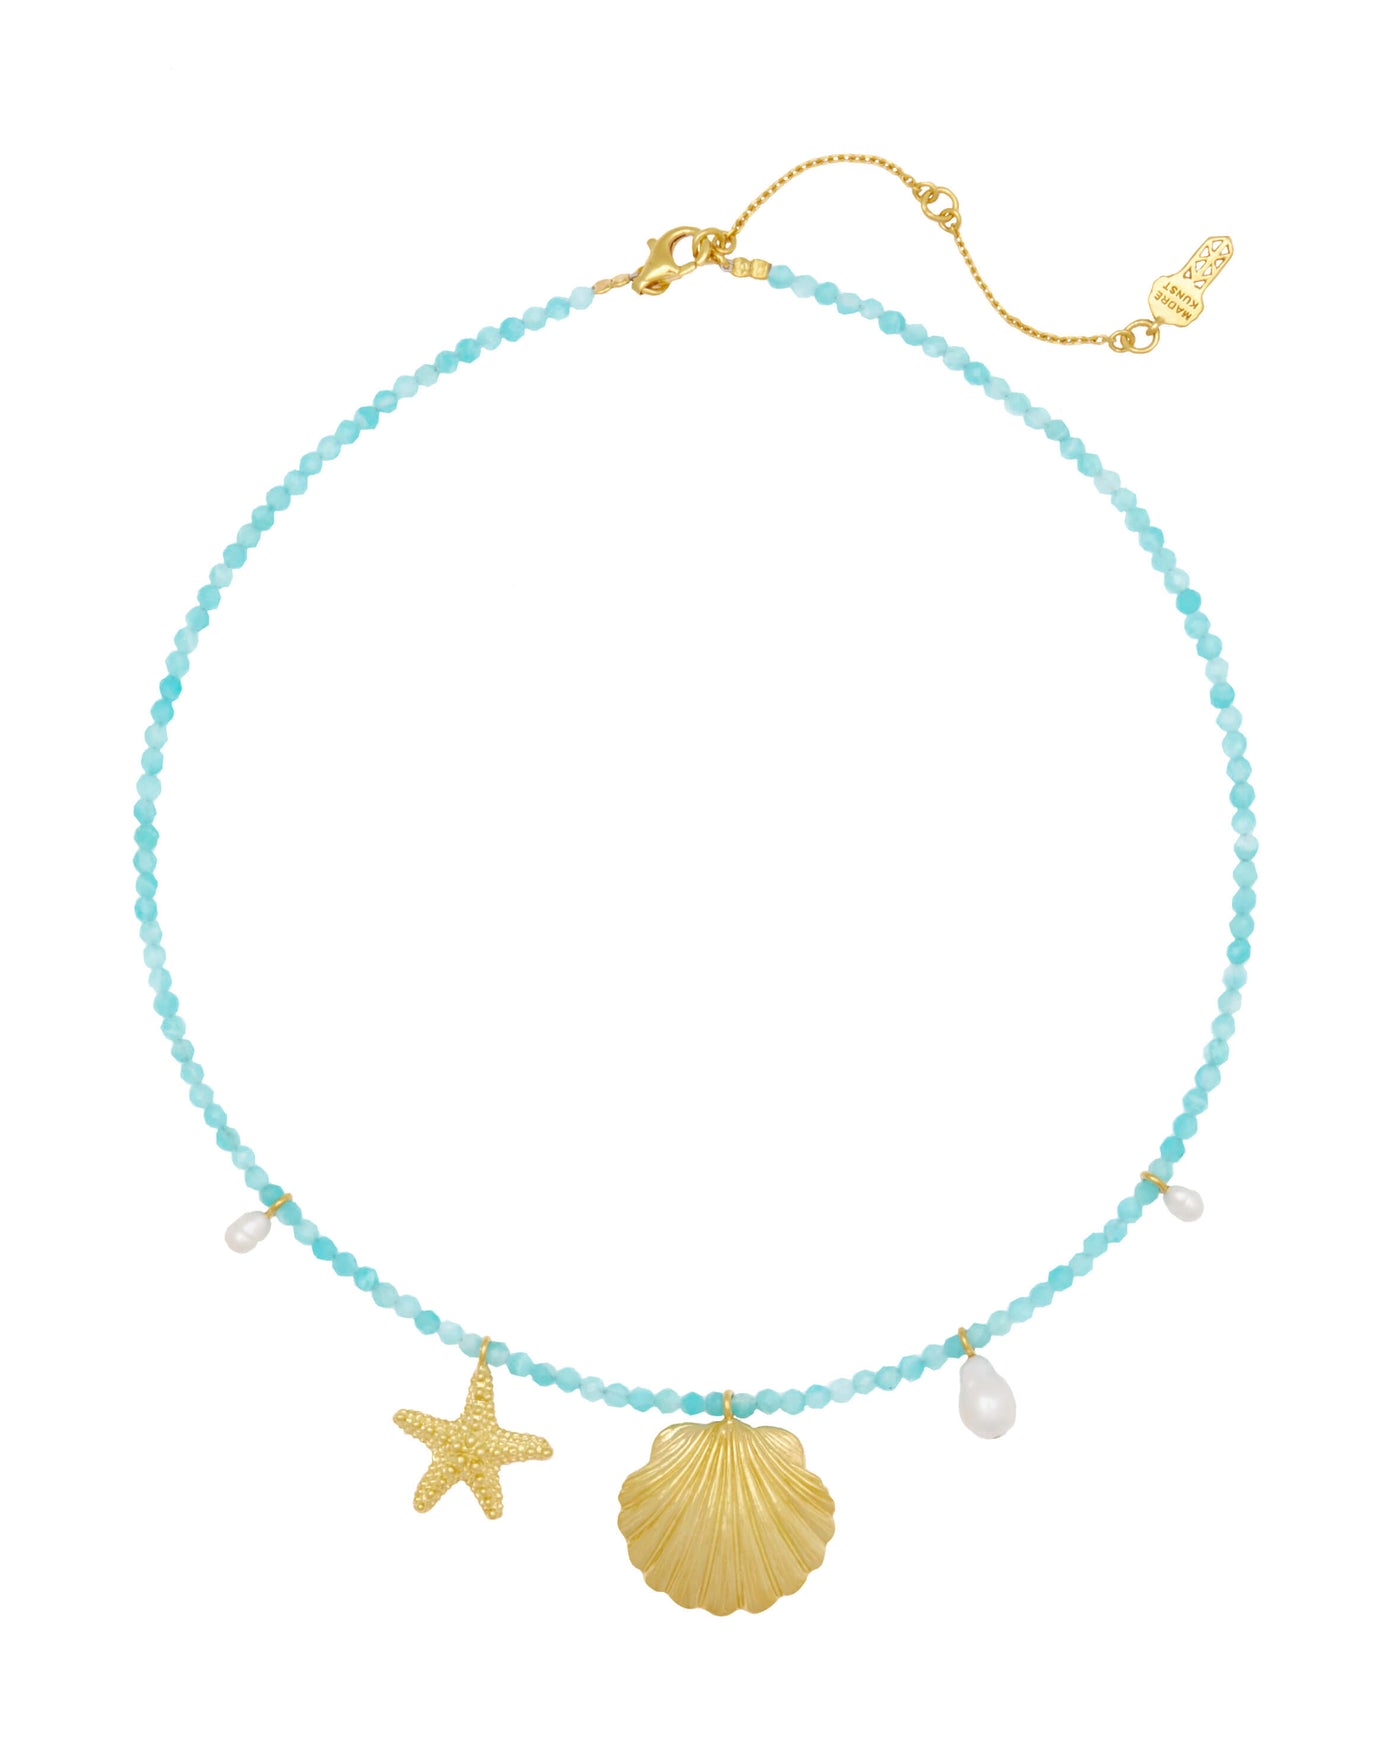 Clam shell with sea Star and pearls aquamarine choker. Silver, gold-plated